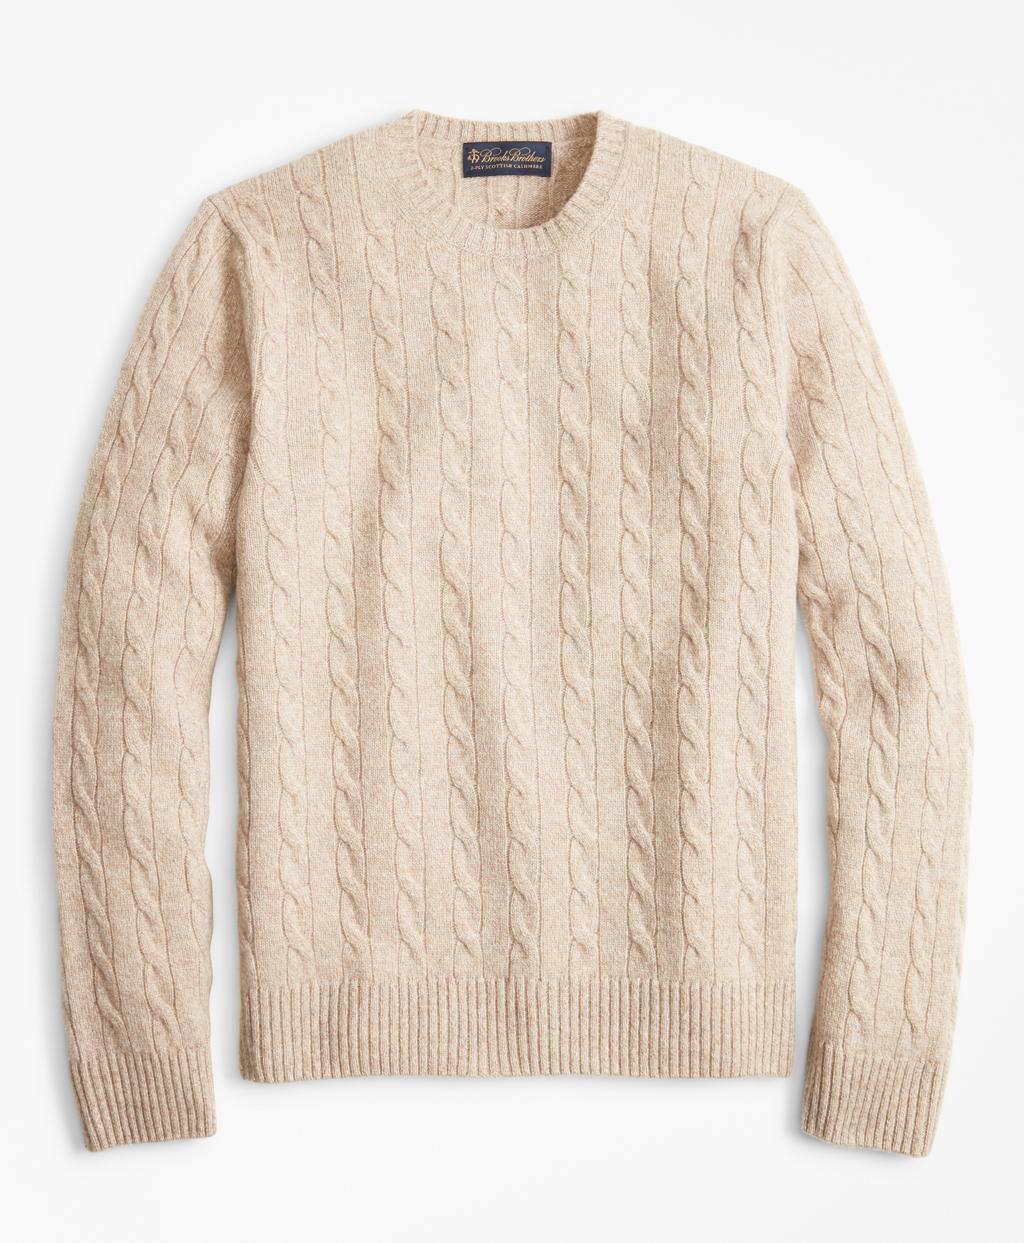 Lyst - Brooks Brothers Cable-knit Crewneck Cashmere Sweater in Natural ...